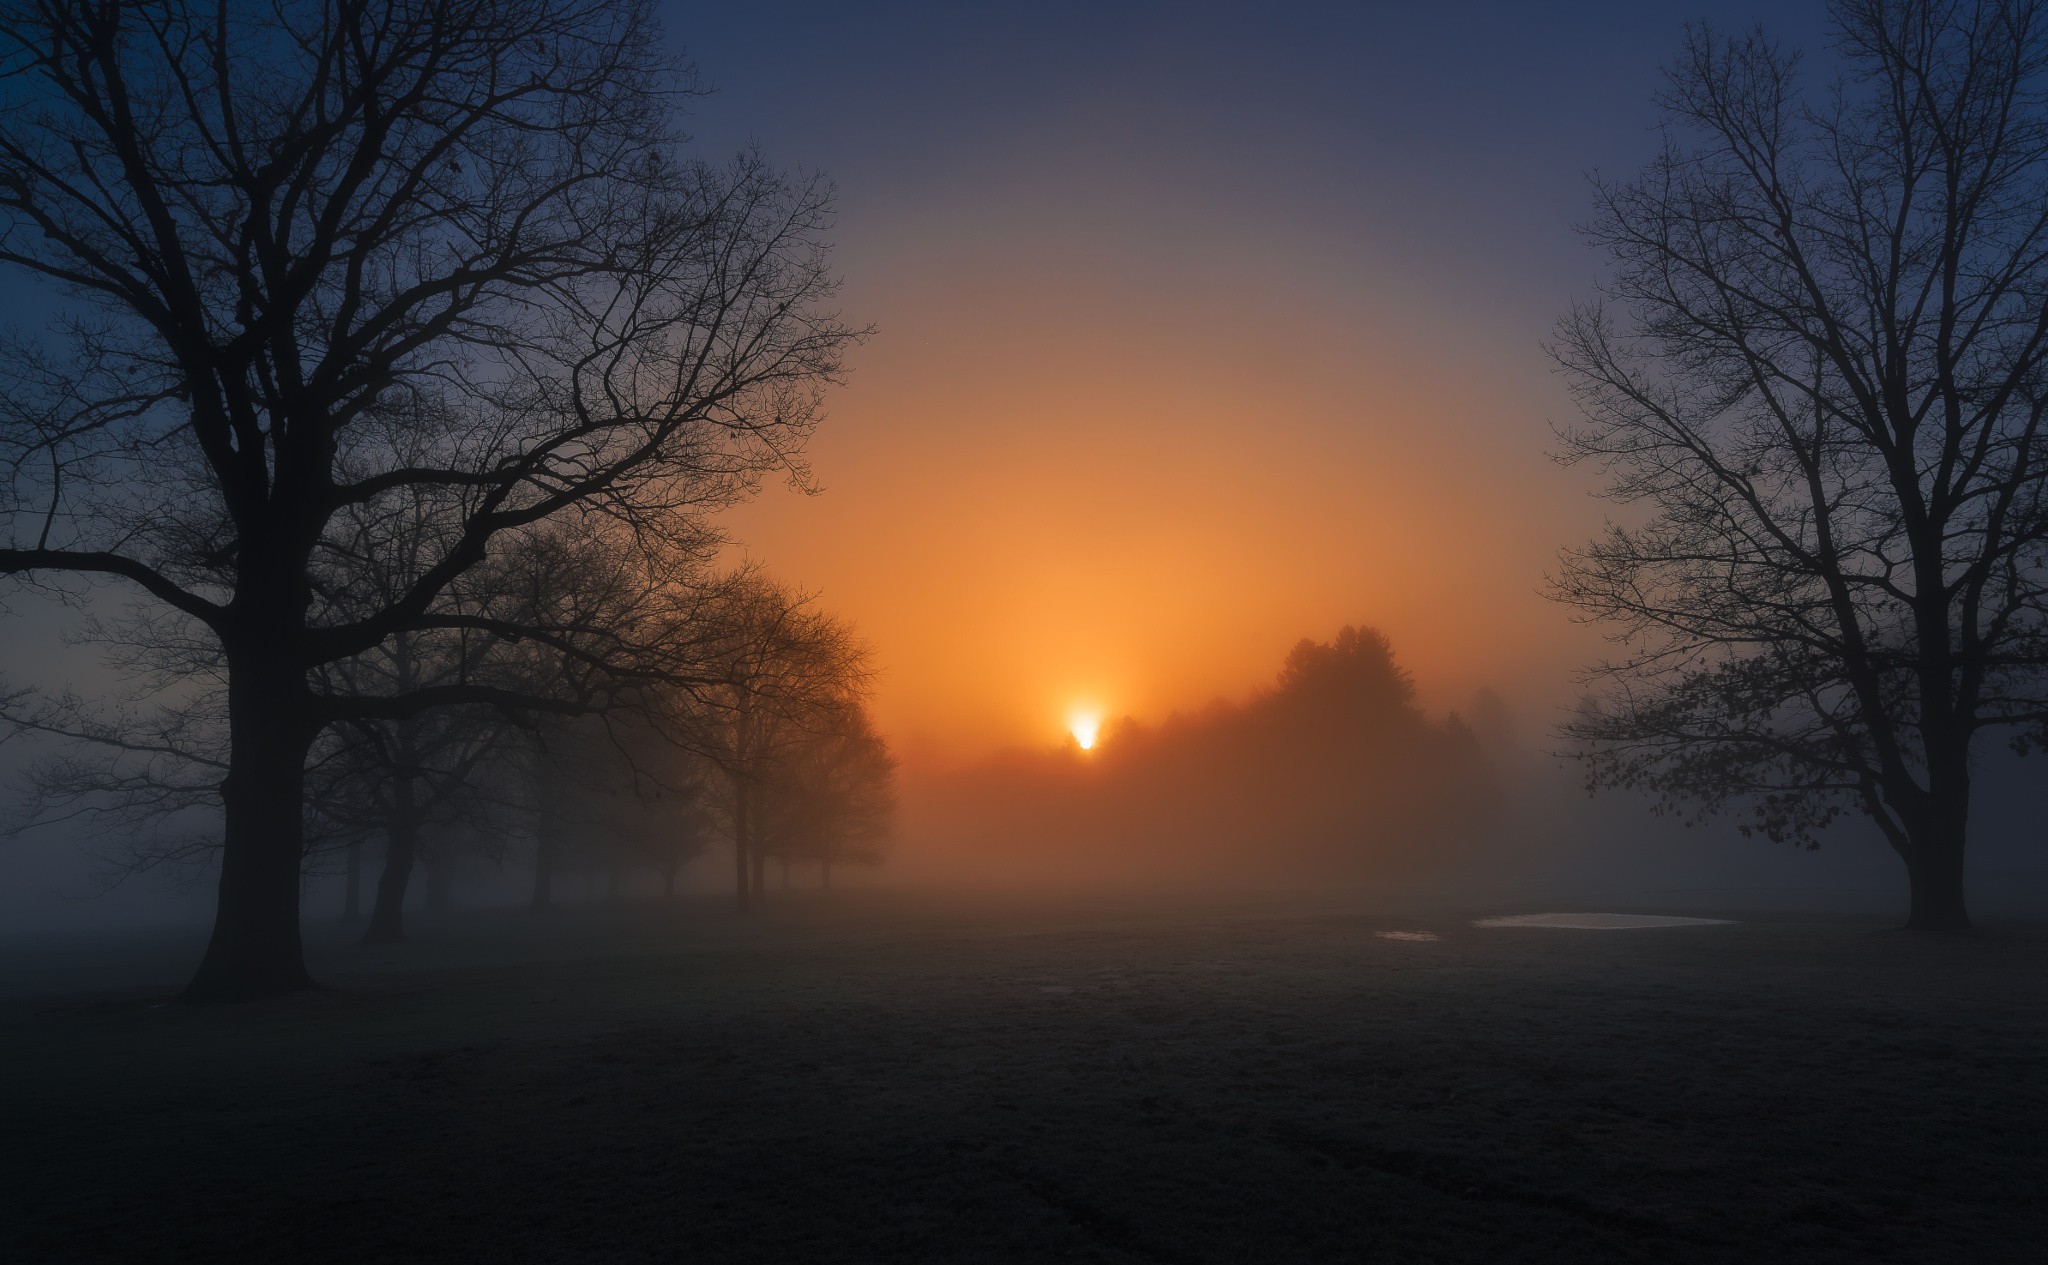 General 2048x1265 nature morning evening cold sunlight trees mist